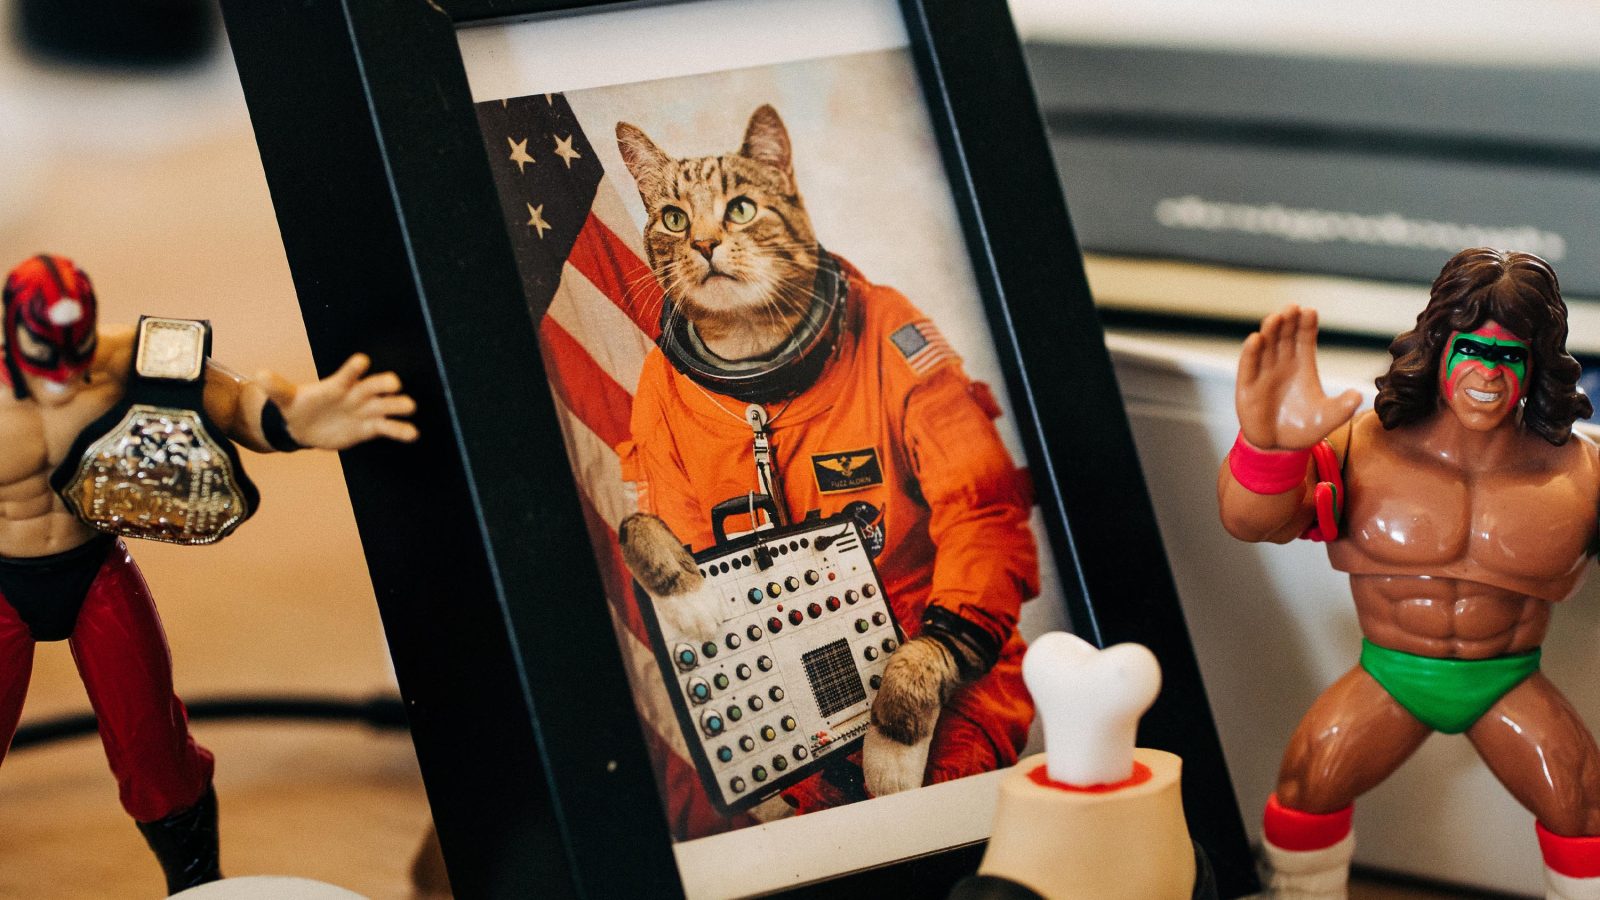 A framed photo of a cat dressed in an astronaut suit with the American flag in the background, flanked by two wrestling action figures on a wooden desk, crafted by Design Agency UK.